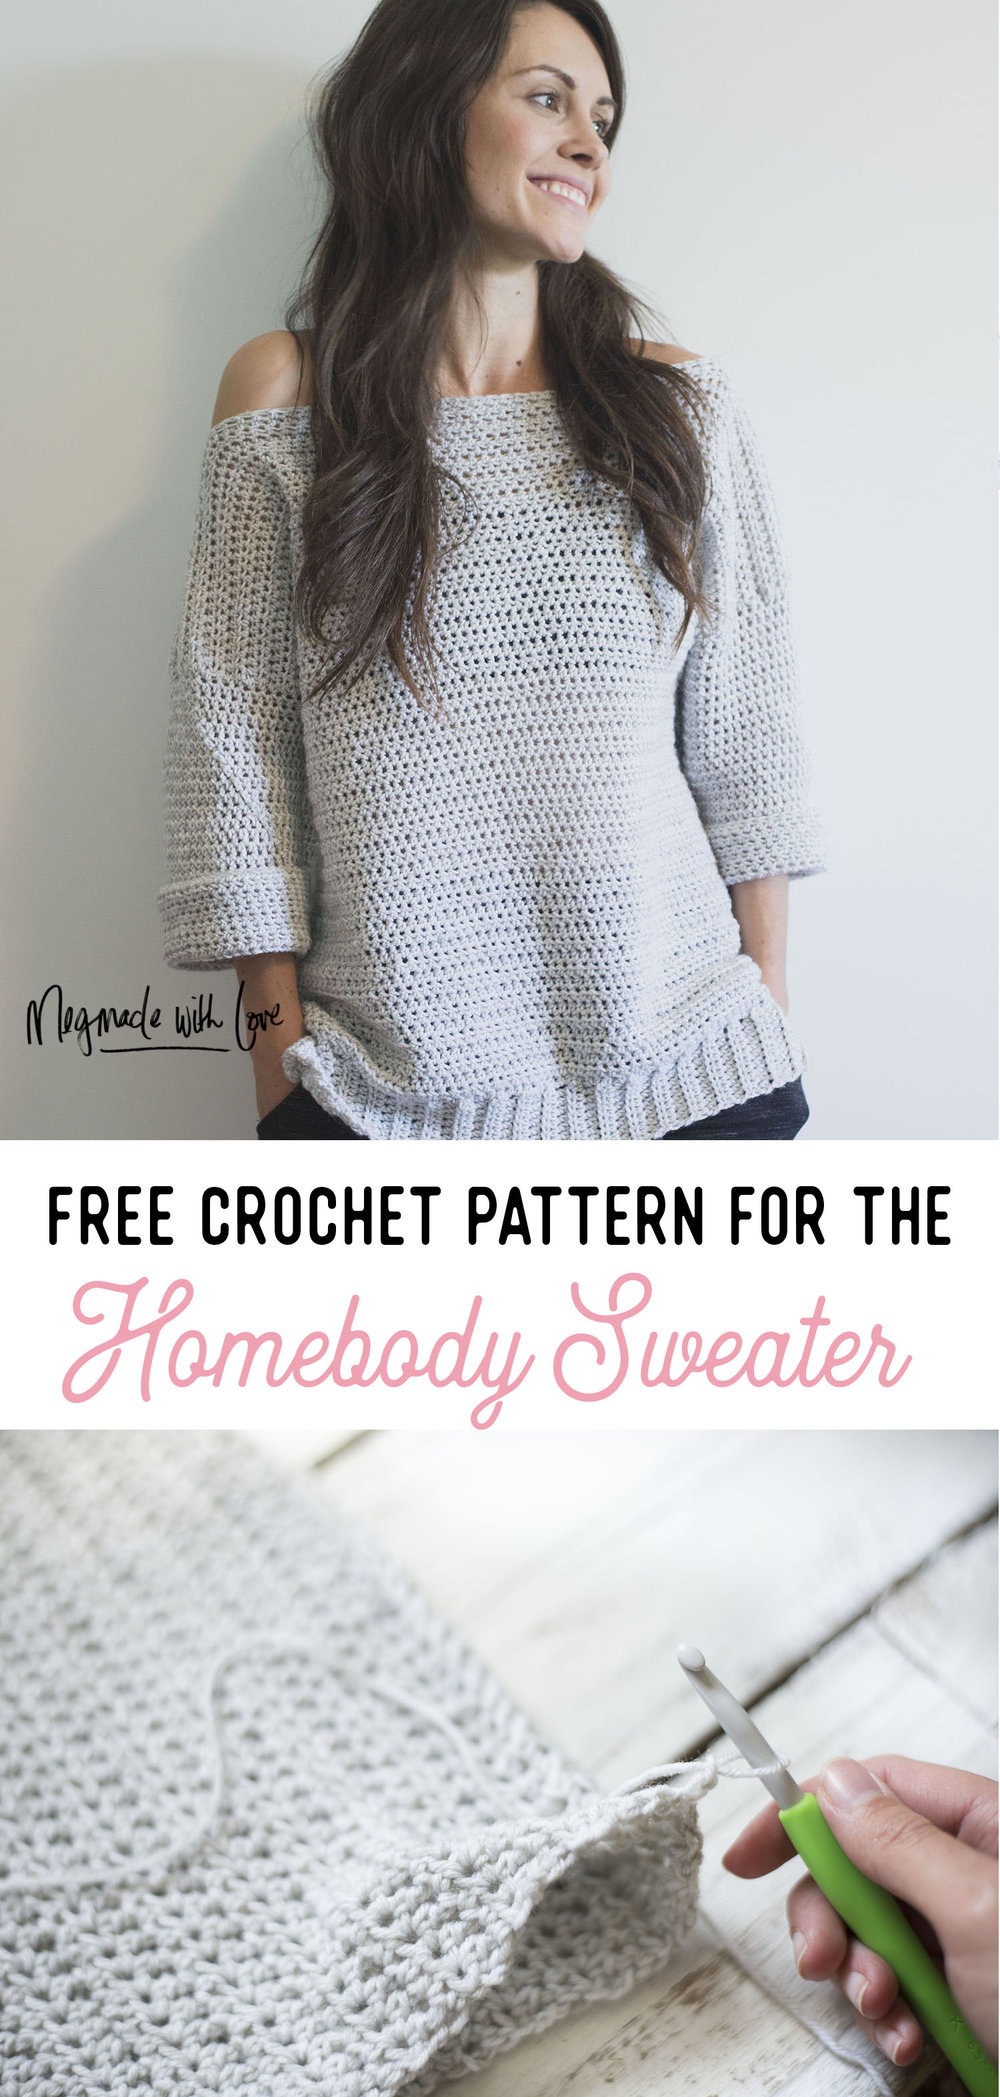 crochet sweater patterns free crochet pattern for the homebody sweater (easy, comfy and cute!) dnvlxry